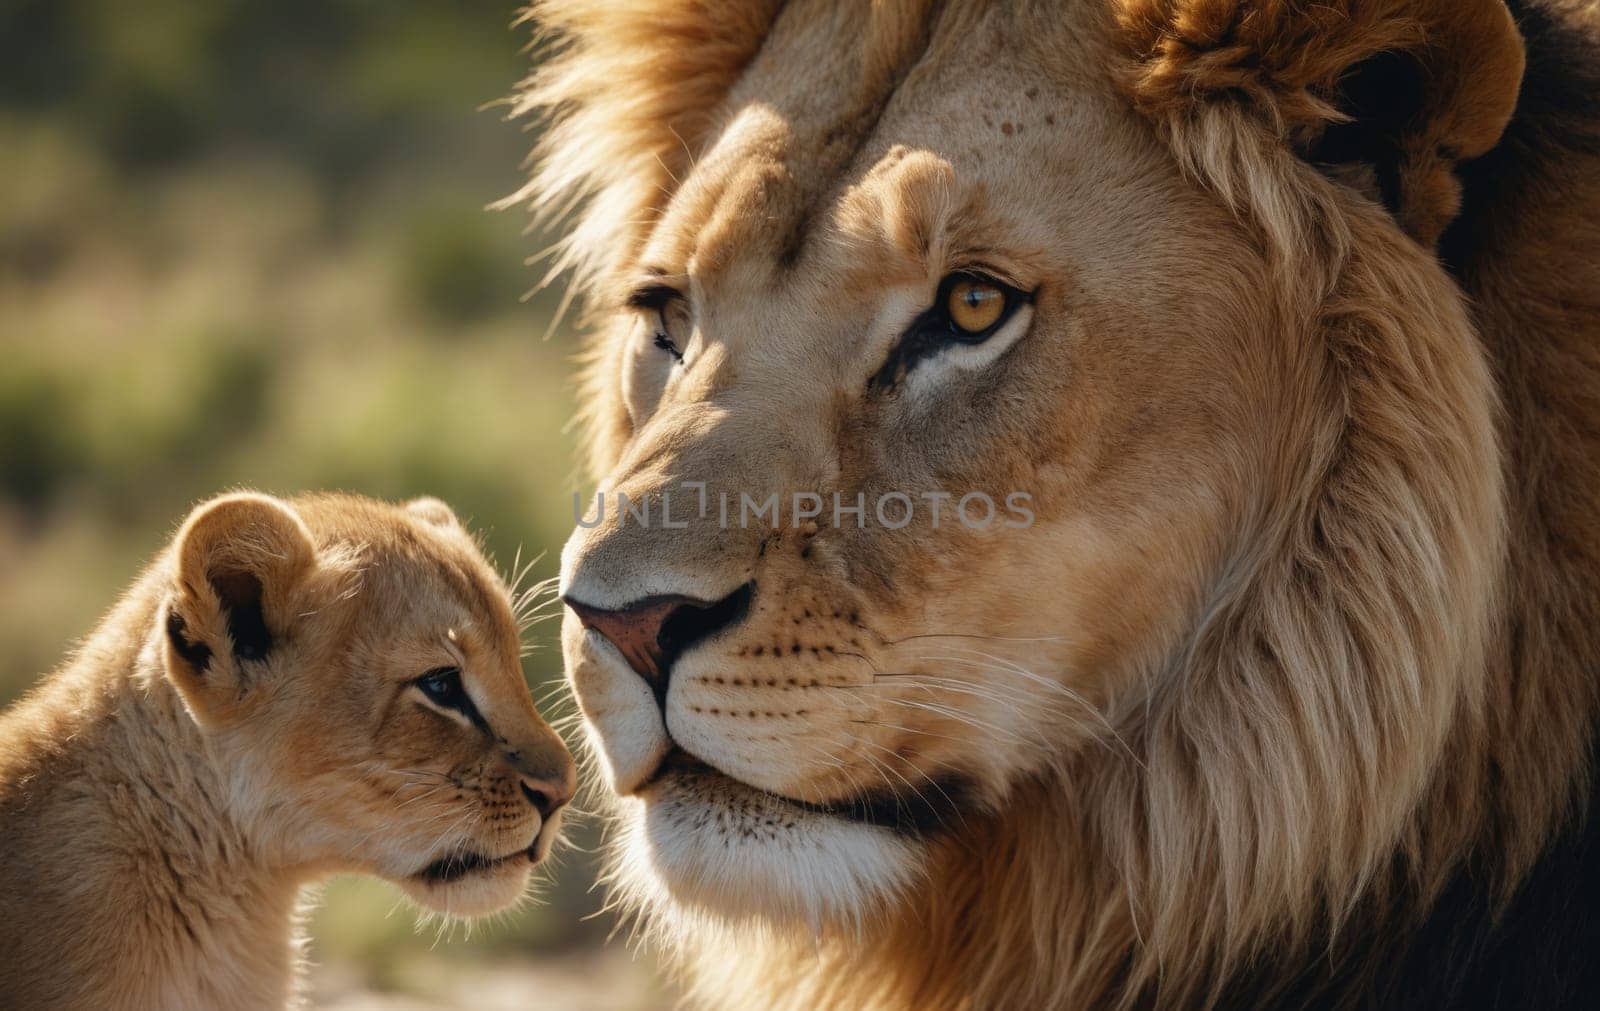 Masai lion and lioness cub with whiskers and fawn in grass by Andre1ns